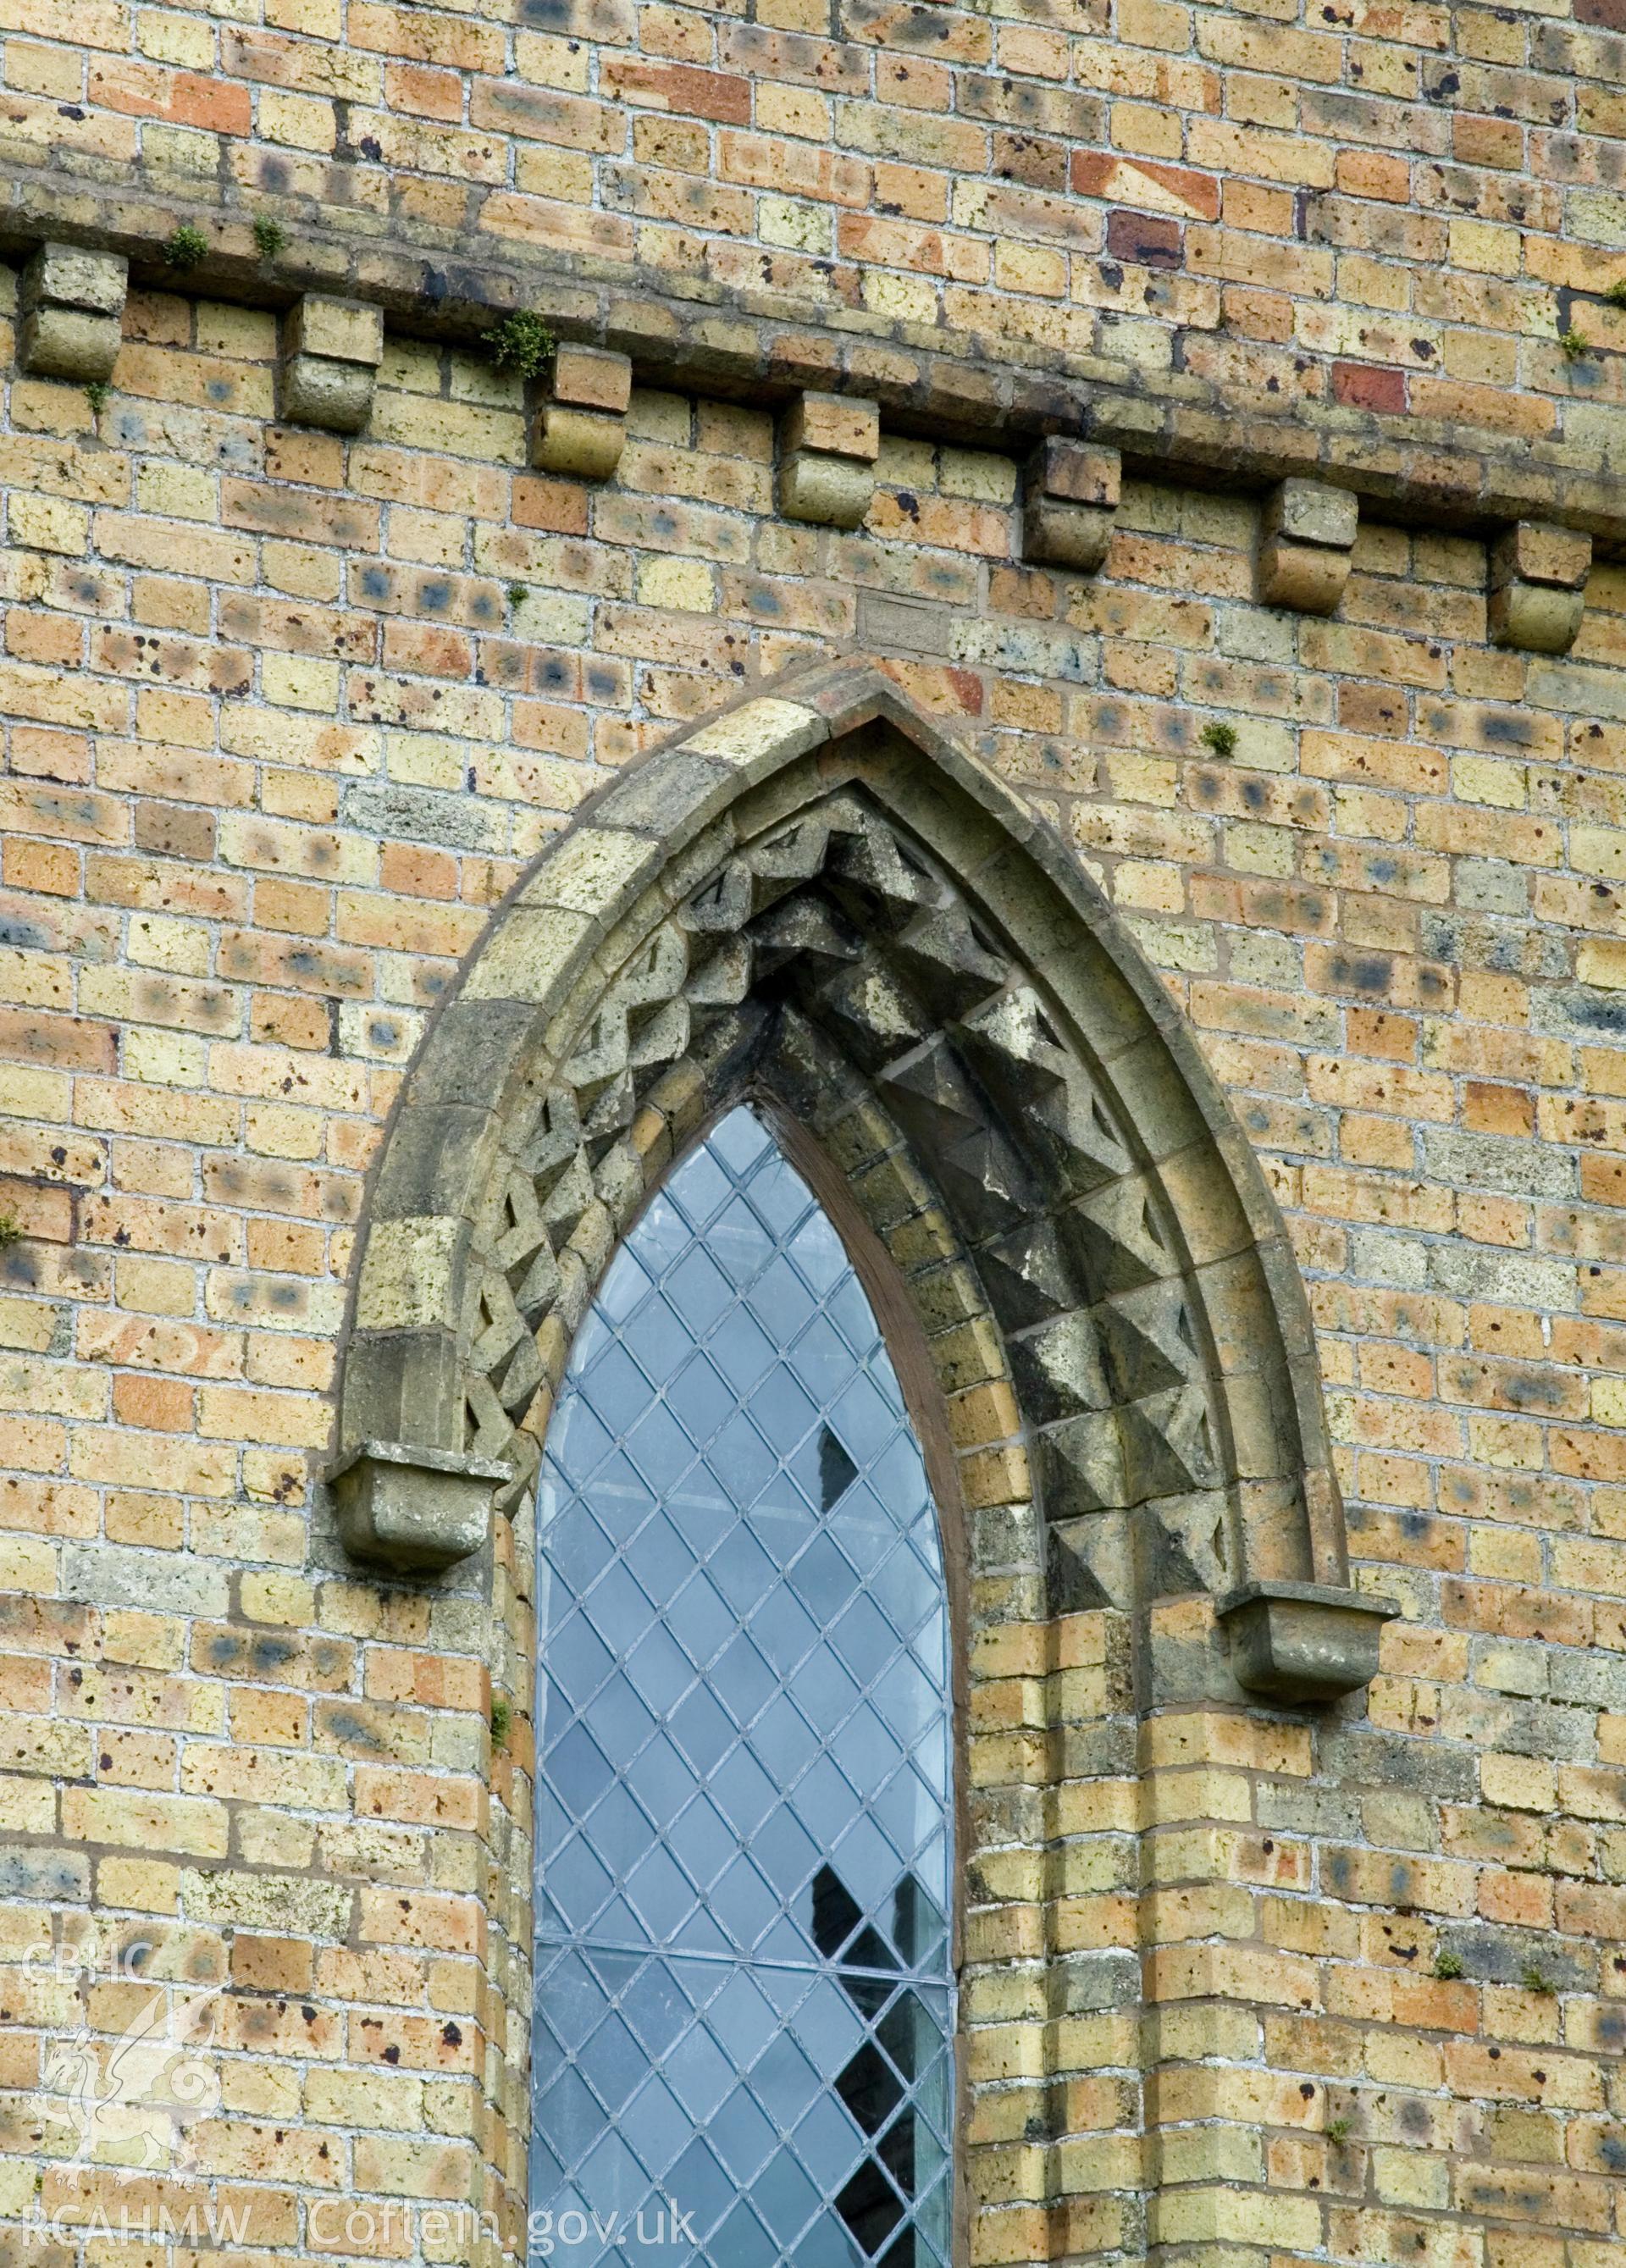 Equilateral window arch with decorative brick chevron moulding.